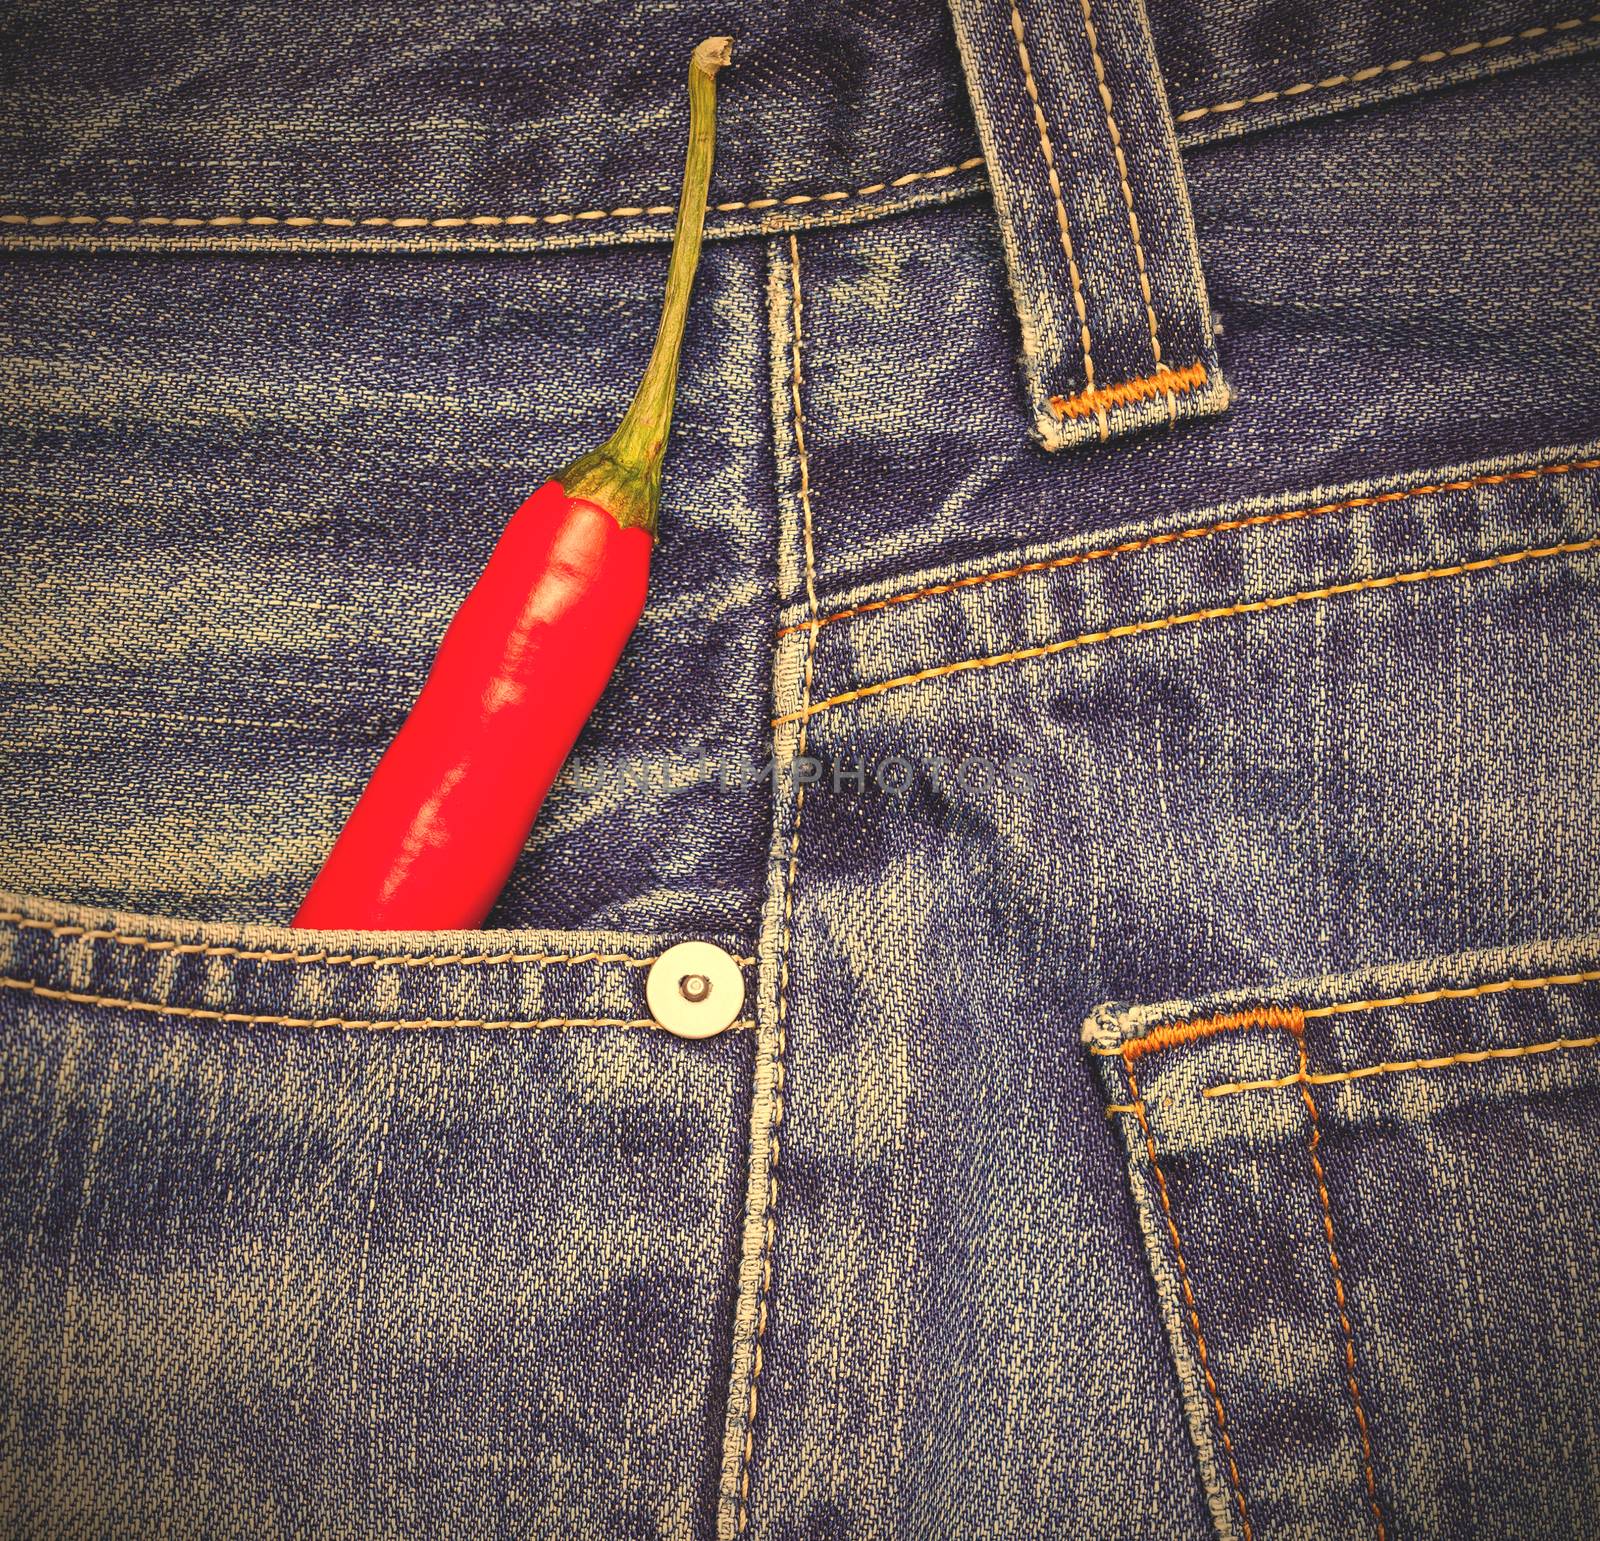 red hot chili peppers in a jeans pocket, instagram image style